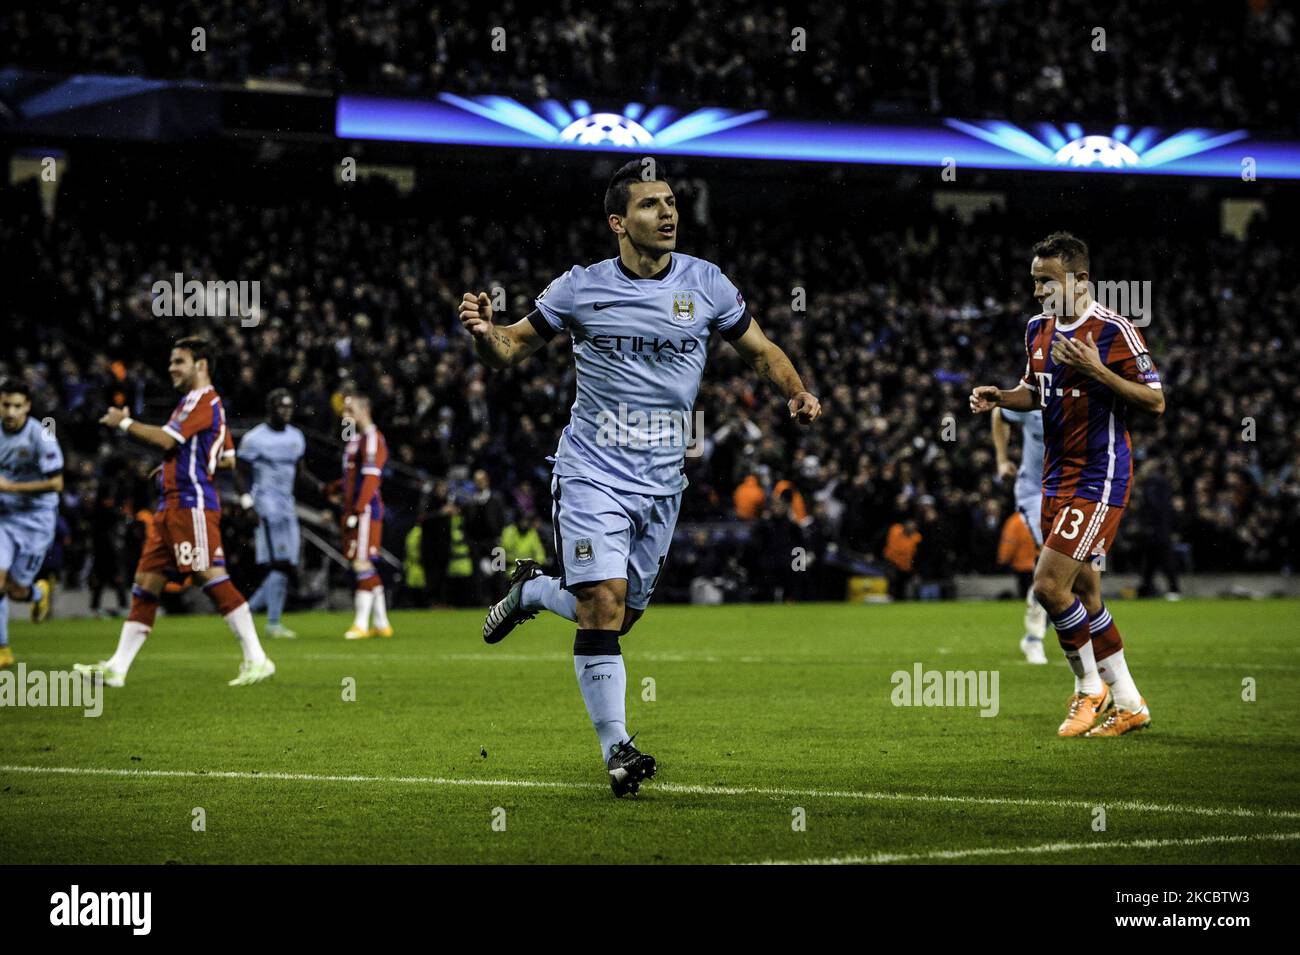 Man City forward Sergio Aguero celebrates opening the scoring during the UEFA Champions League, Group E match between Manchester City & Bayern Munich at the Etihad Stadium in Manchester on Wednesday November 25th 2014. (Photo by MI News/NurPhoto) Stock Photo